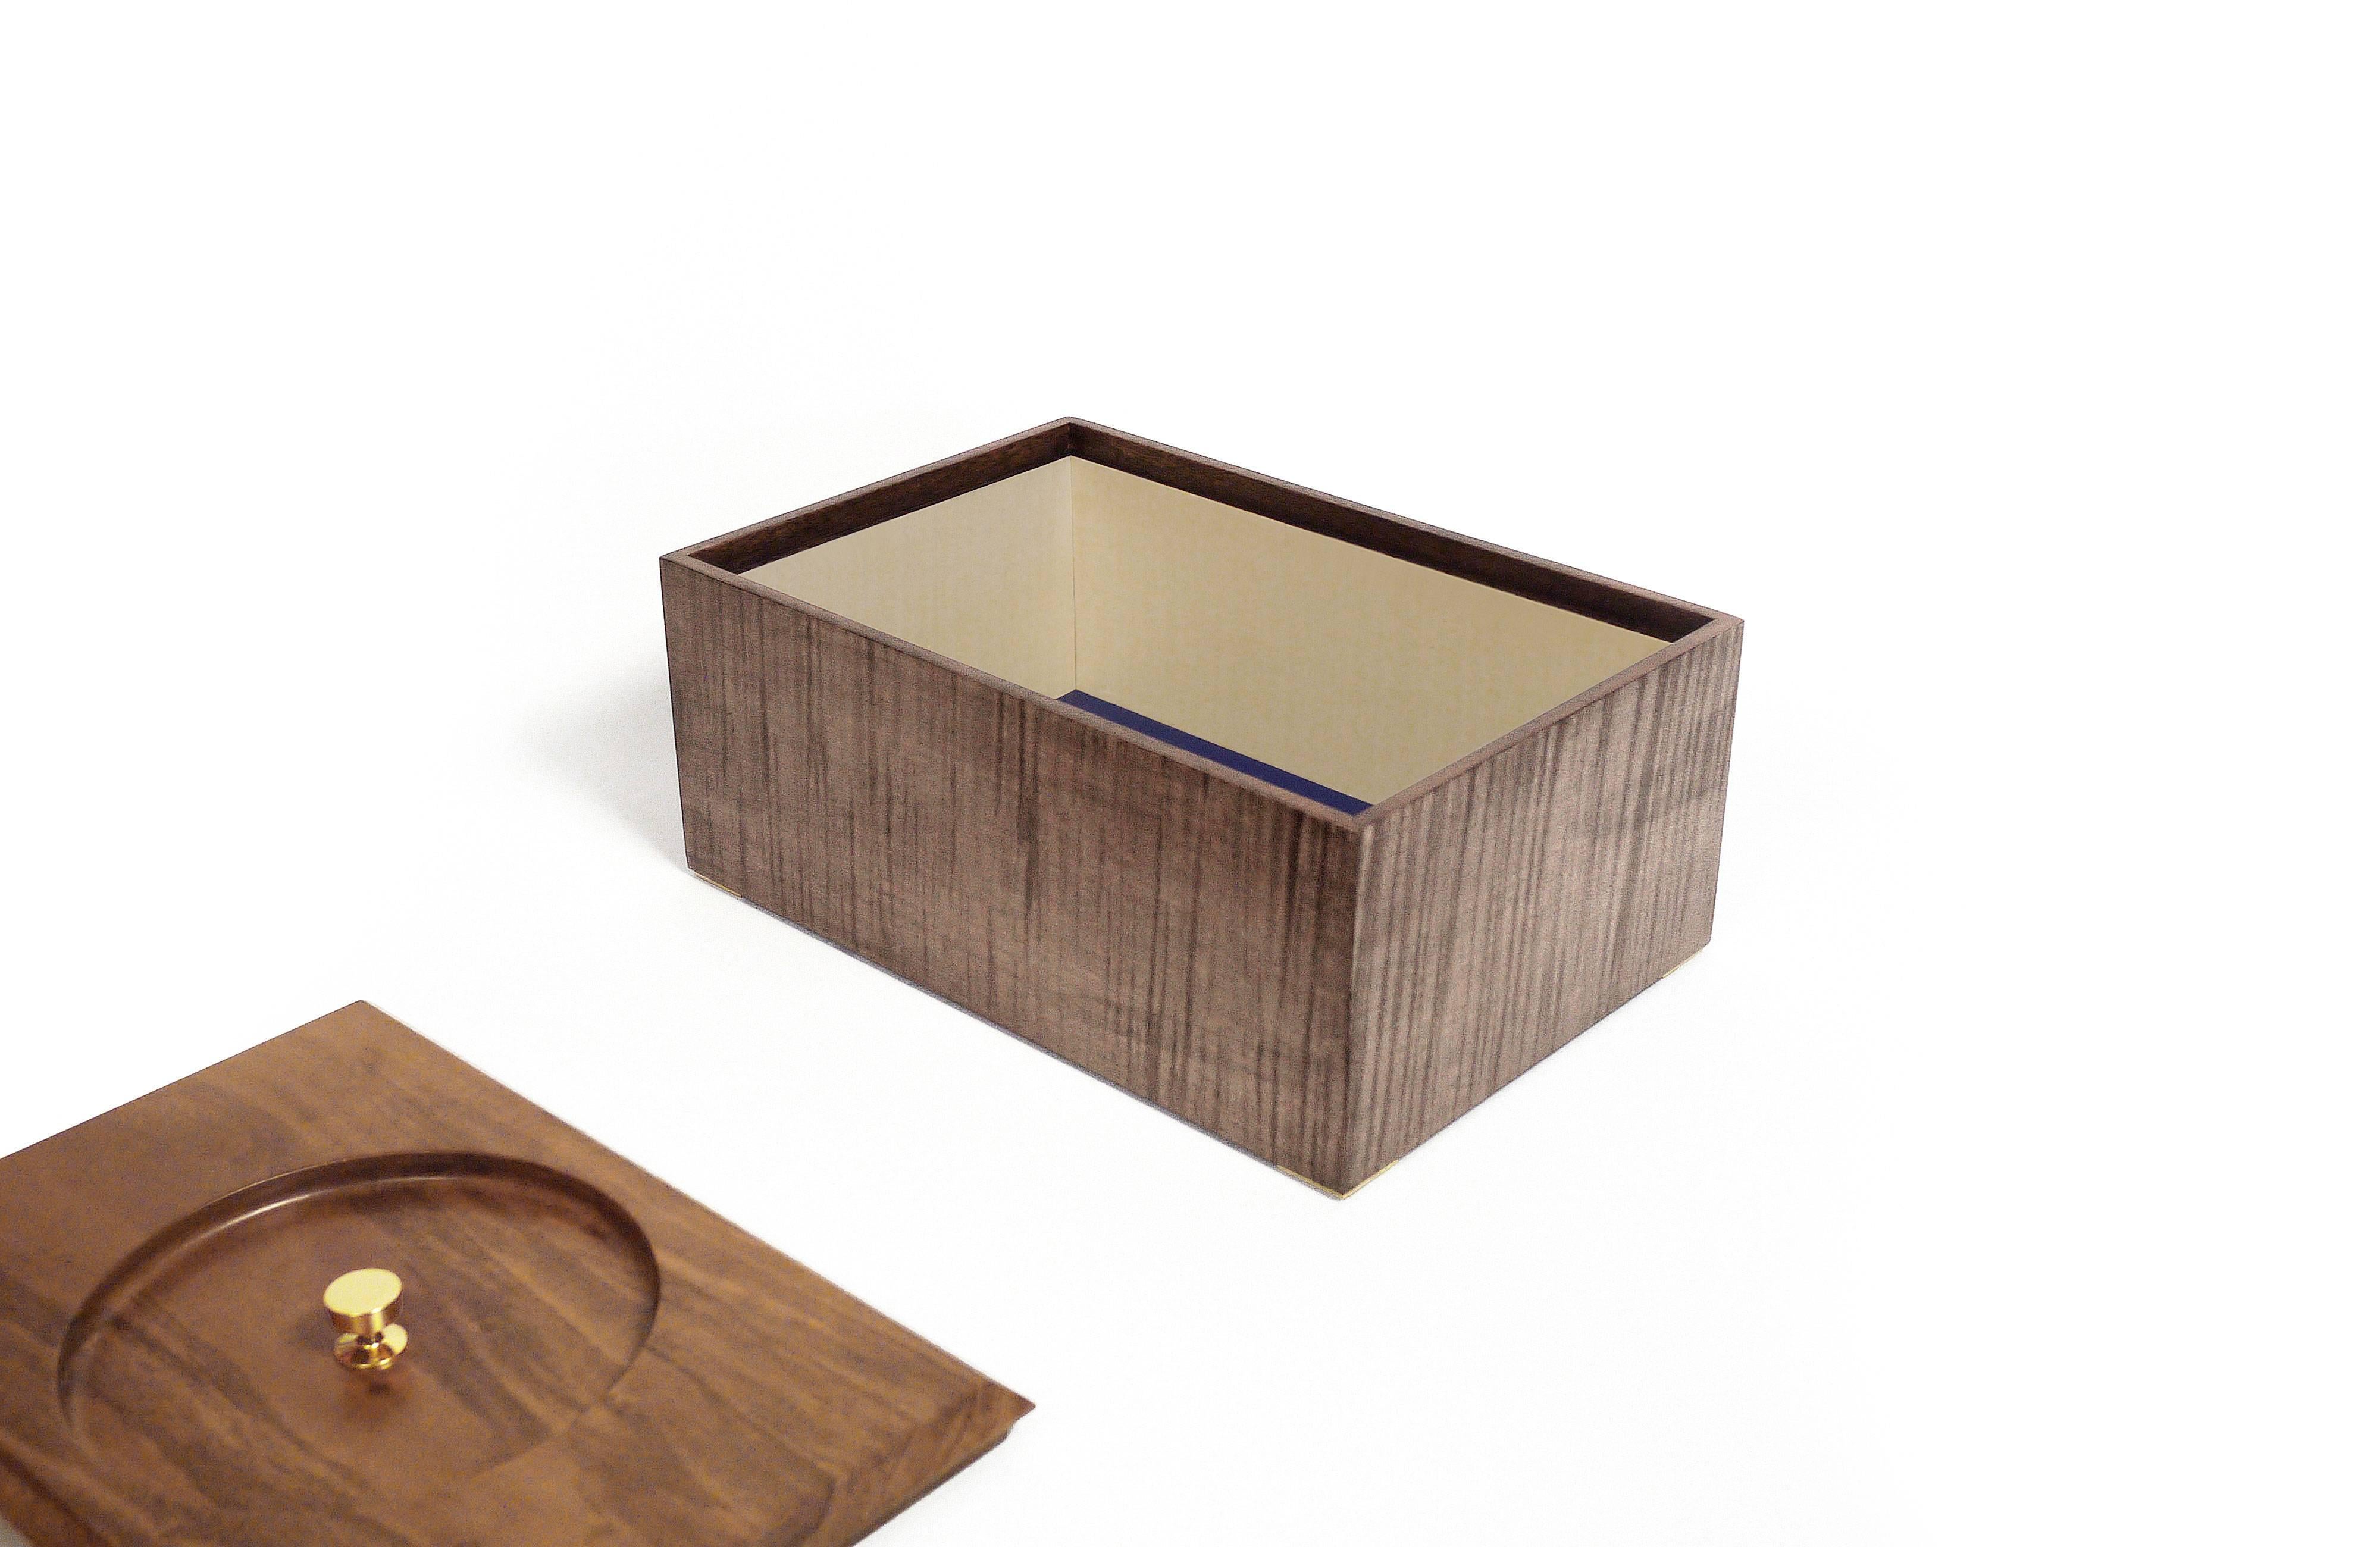 Part of Les Few's Vanina Vanini collection, this contemporary, sycamore and brass, modern, Minimalist wood box is made by artisans in Sweden. The box comes with the choice of a leather interior in granite grey, anthracite, navy, powder pink and